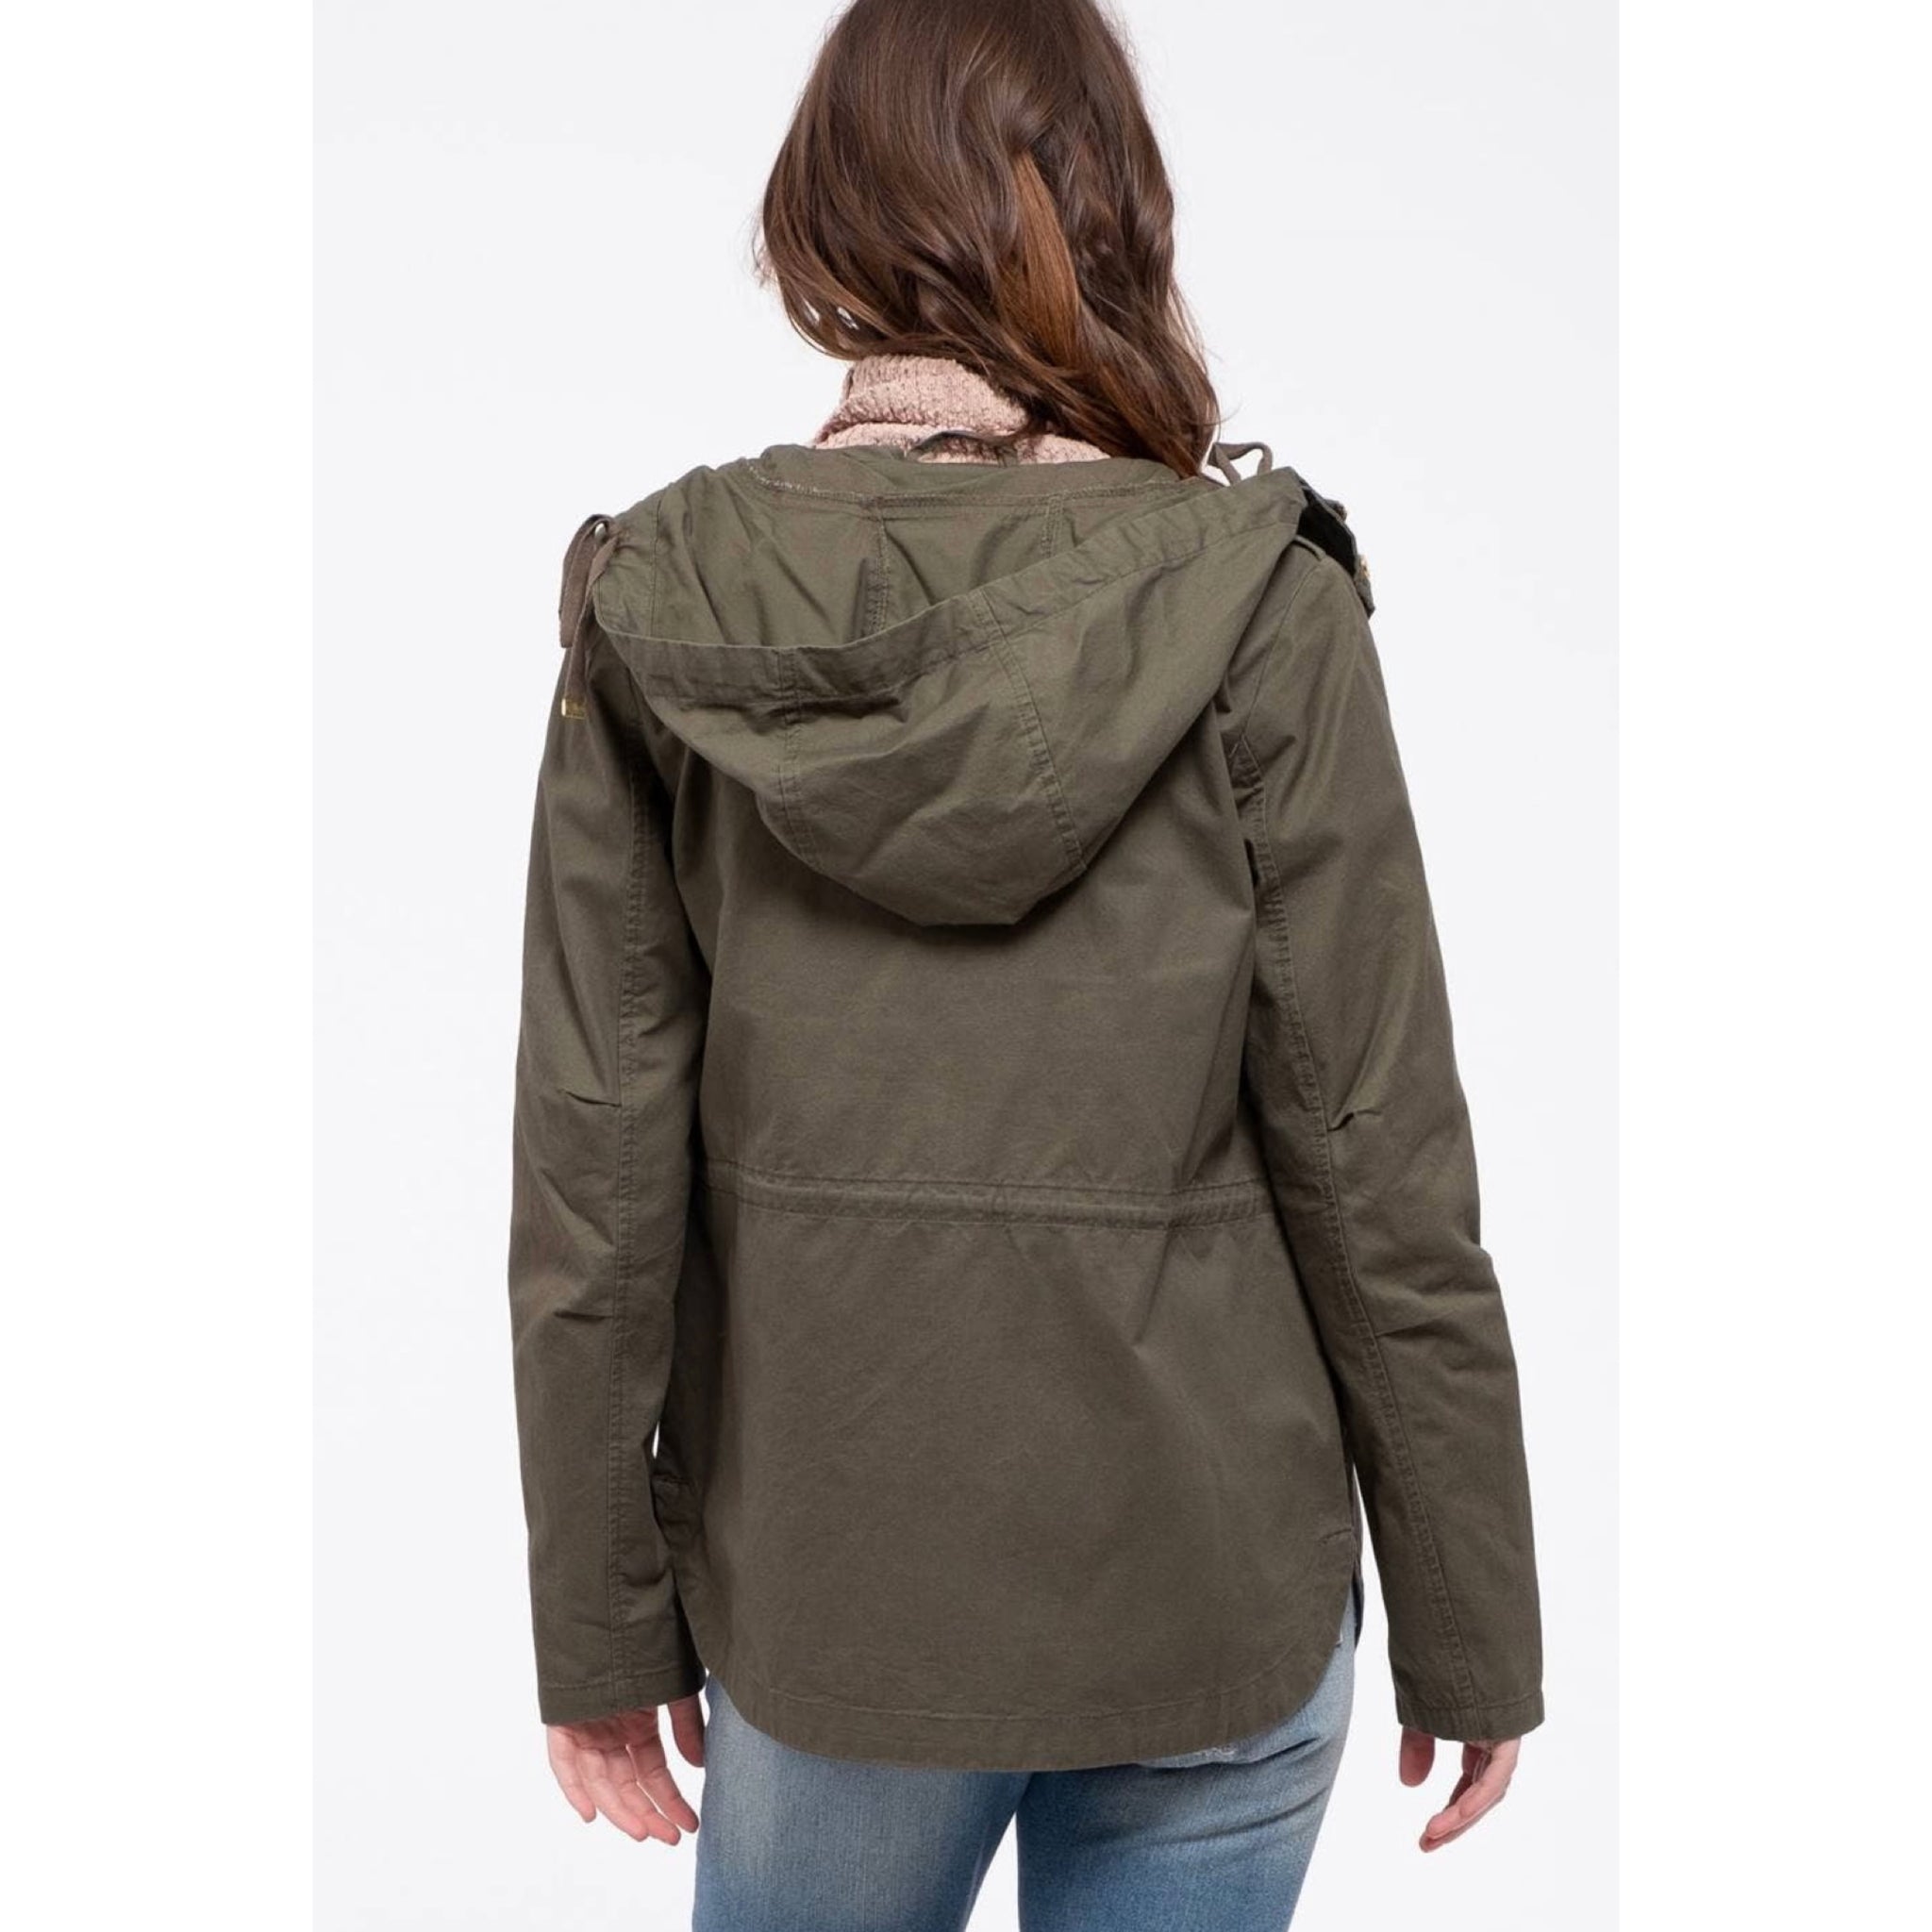 Hooded jacket, zip up closure with snap buttons, drawstring at waist, and front pockets with snap buttons.